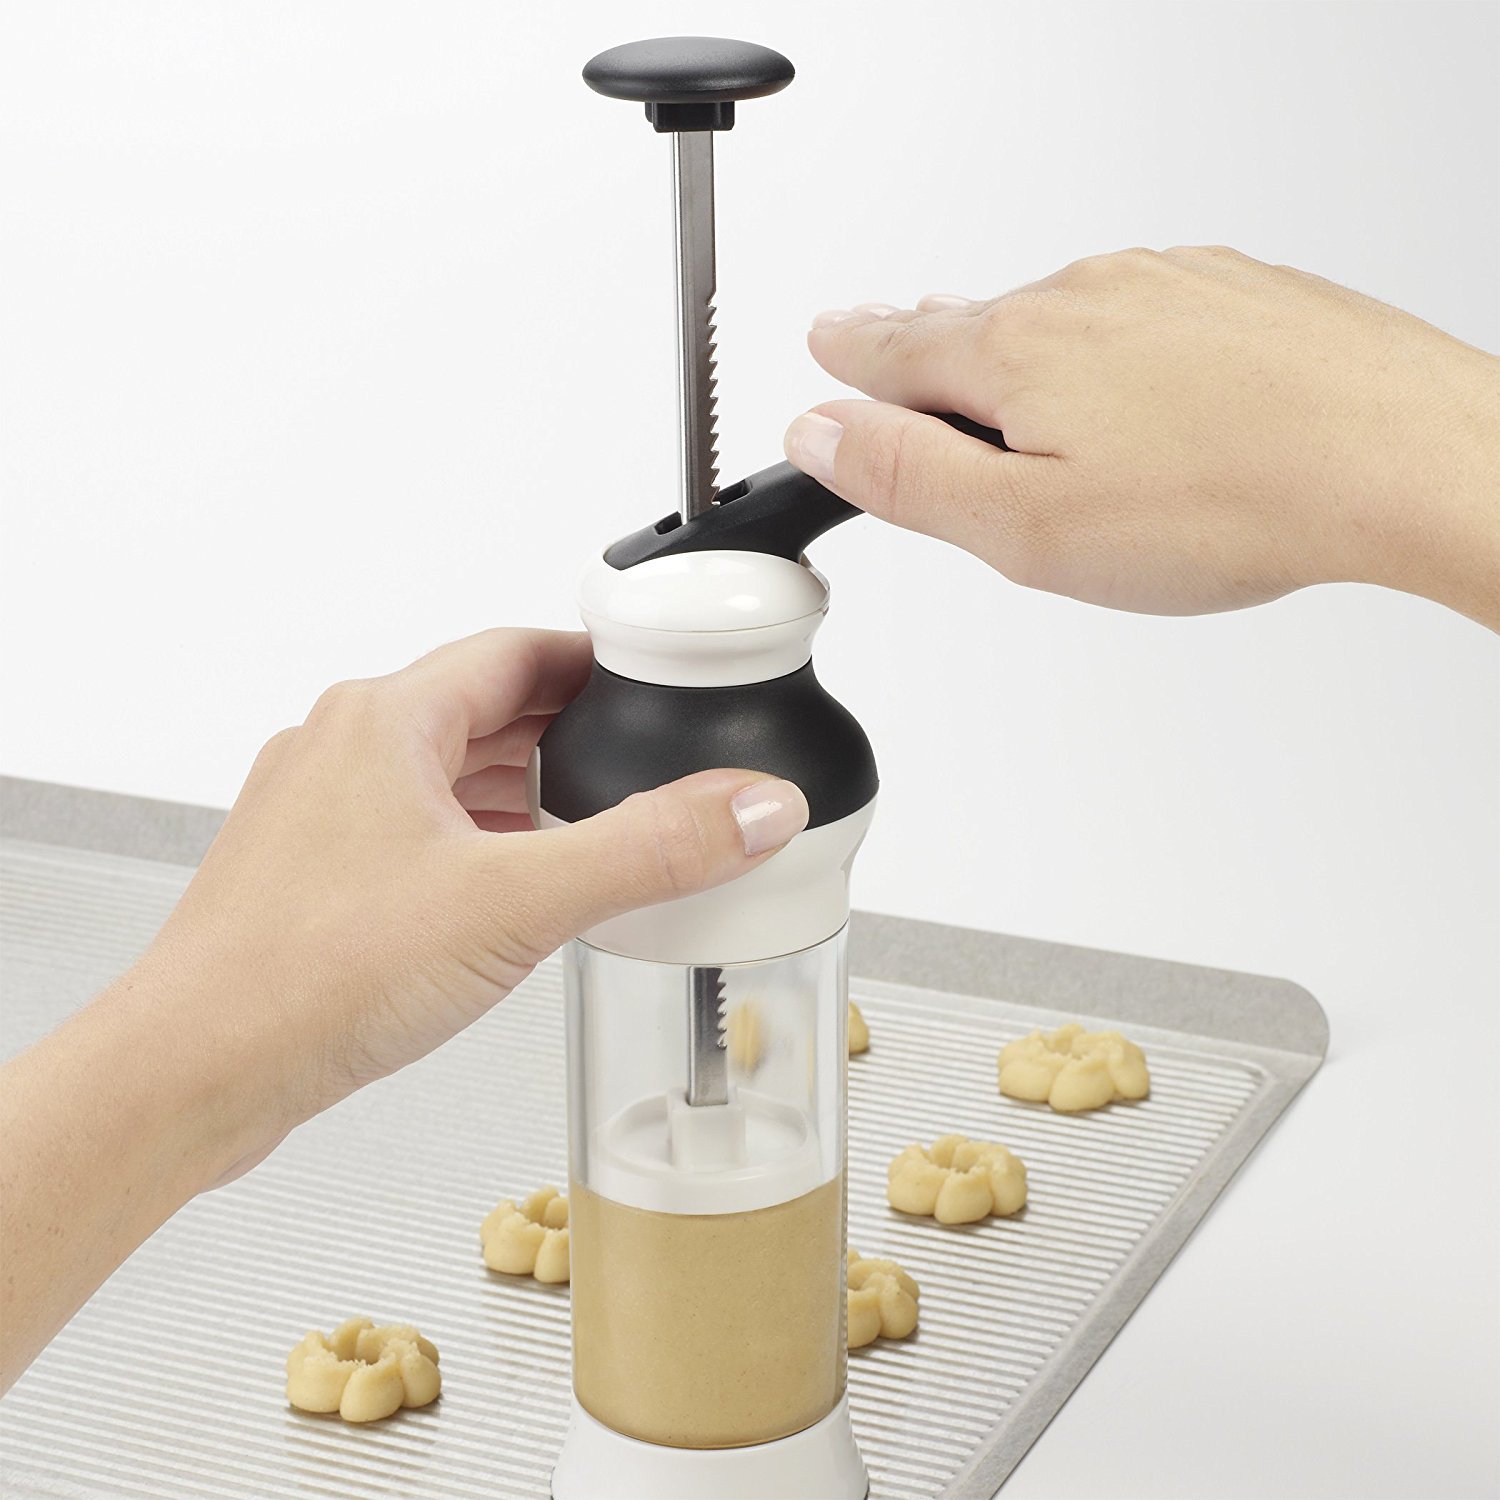 Use a cookie press to make decorative cookies with The Cookie Elf.